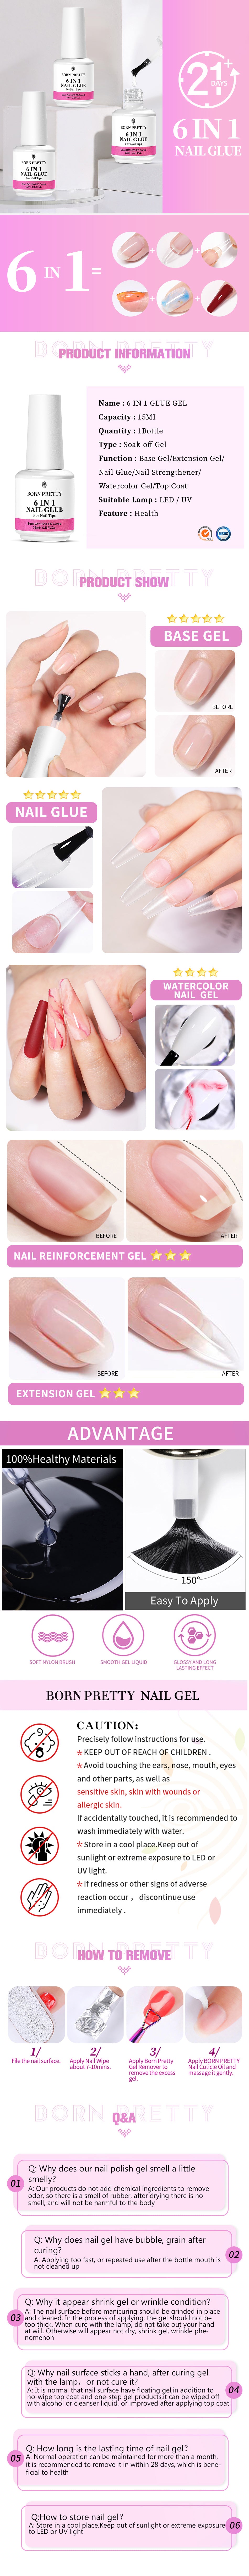 Perfect Nails UG on Instagram: Solid Nail Gel Glue now Available at  Perfect Nails Ug.. It is Long lasting (3-4 weeks), safe and Easy to use. It  is suitable for all beginners